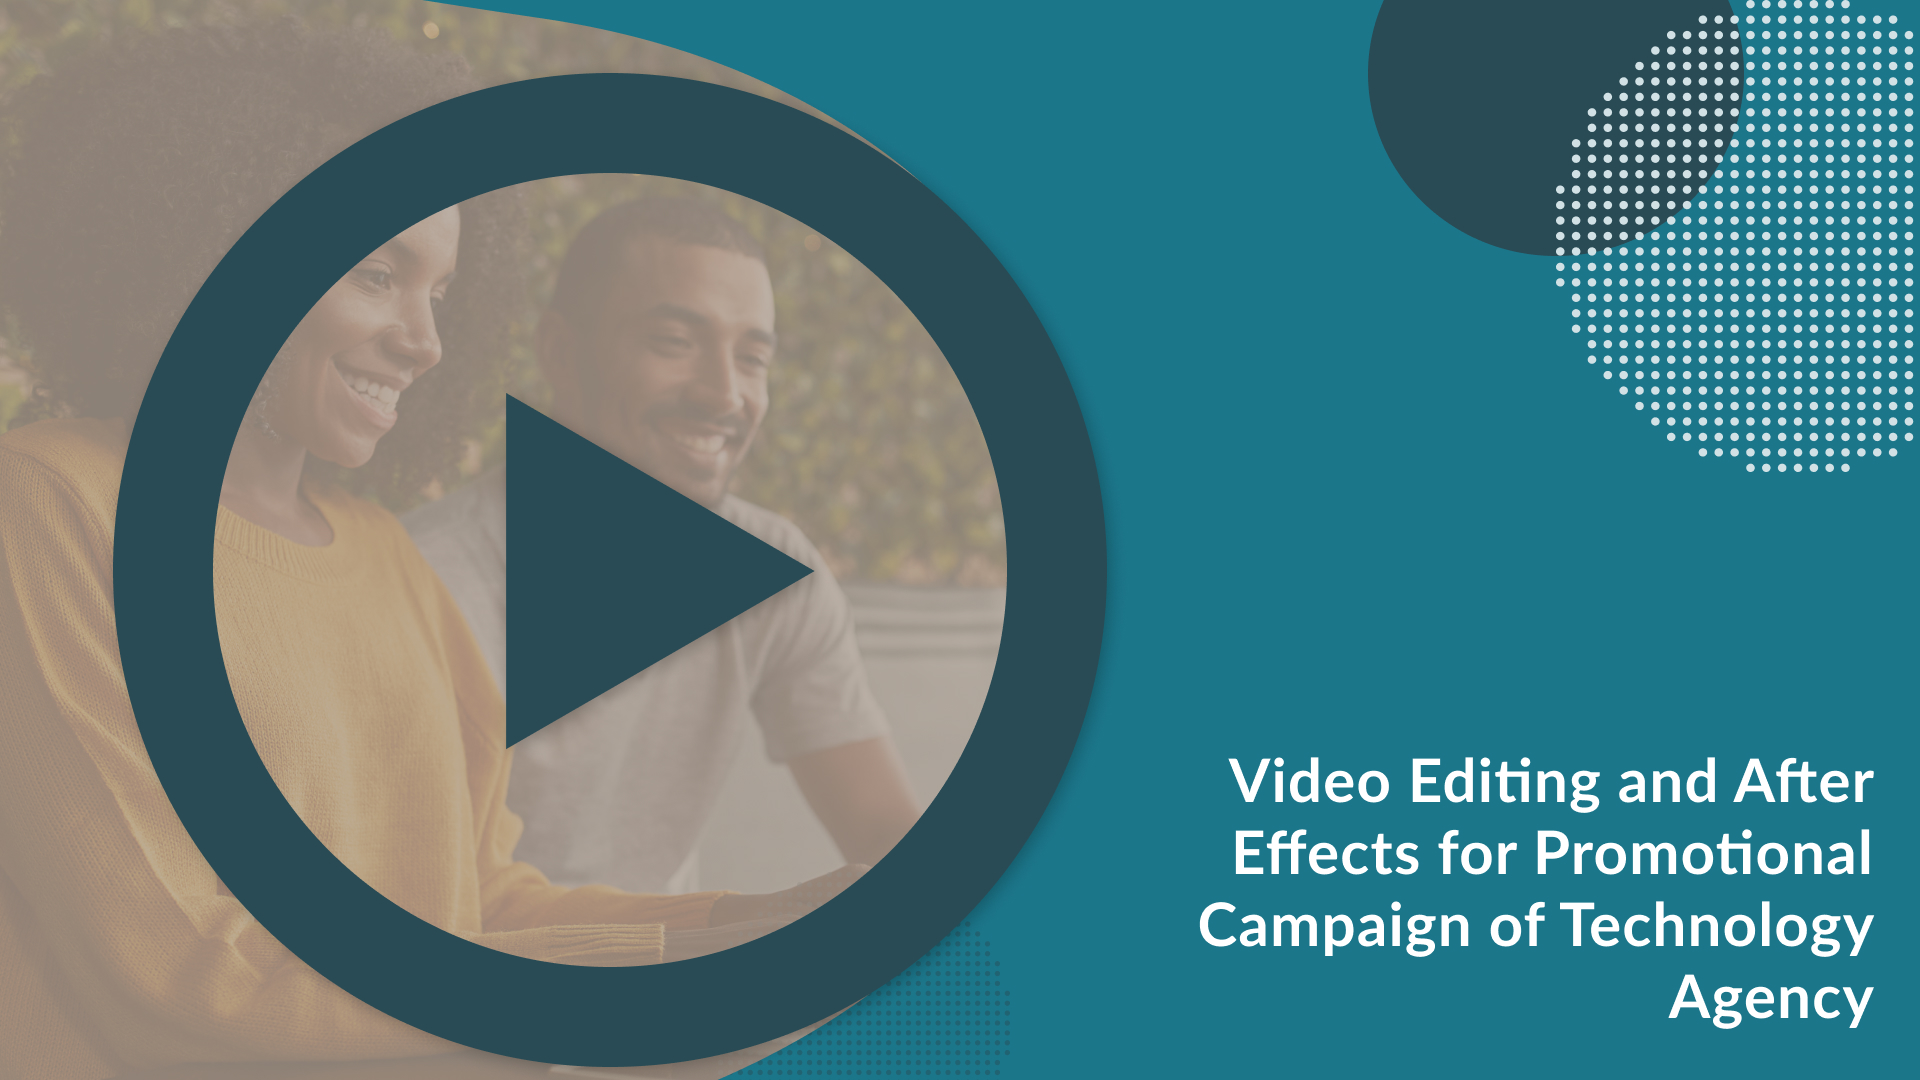 Text reads, "Nocell Technologies: Video Editing and After Effects  for Promotional Campaign".